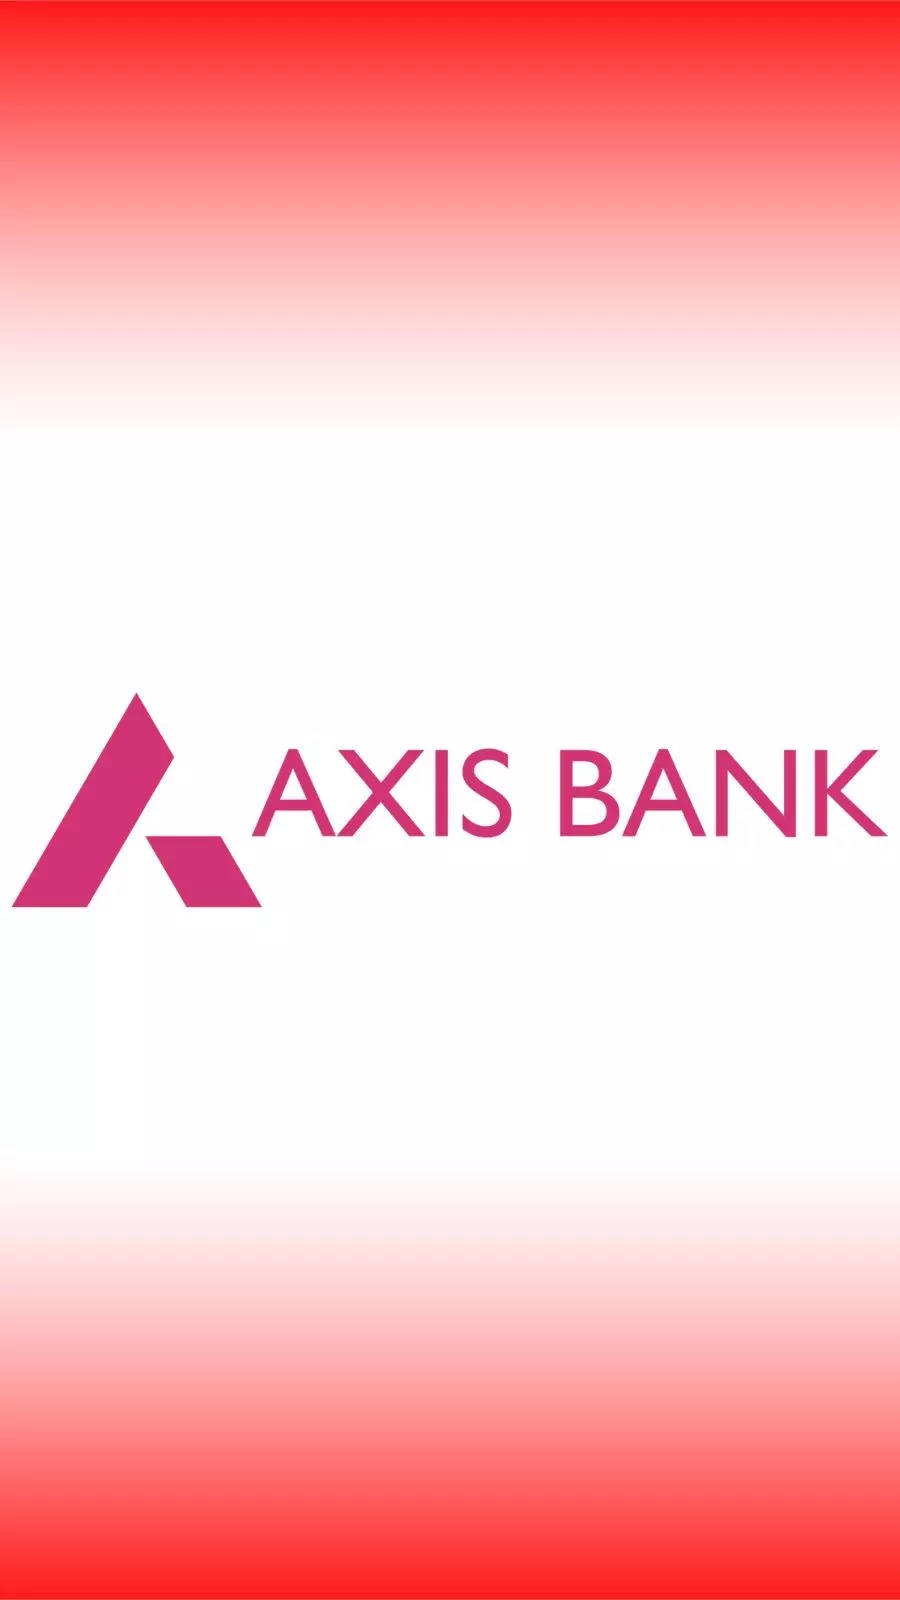 Axis Bank - Travel more and earn more rewards. Get the... | Facebook